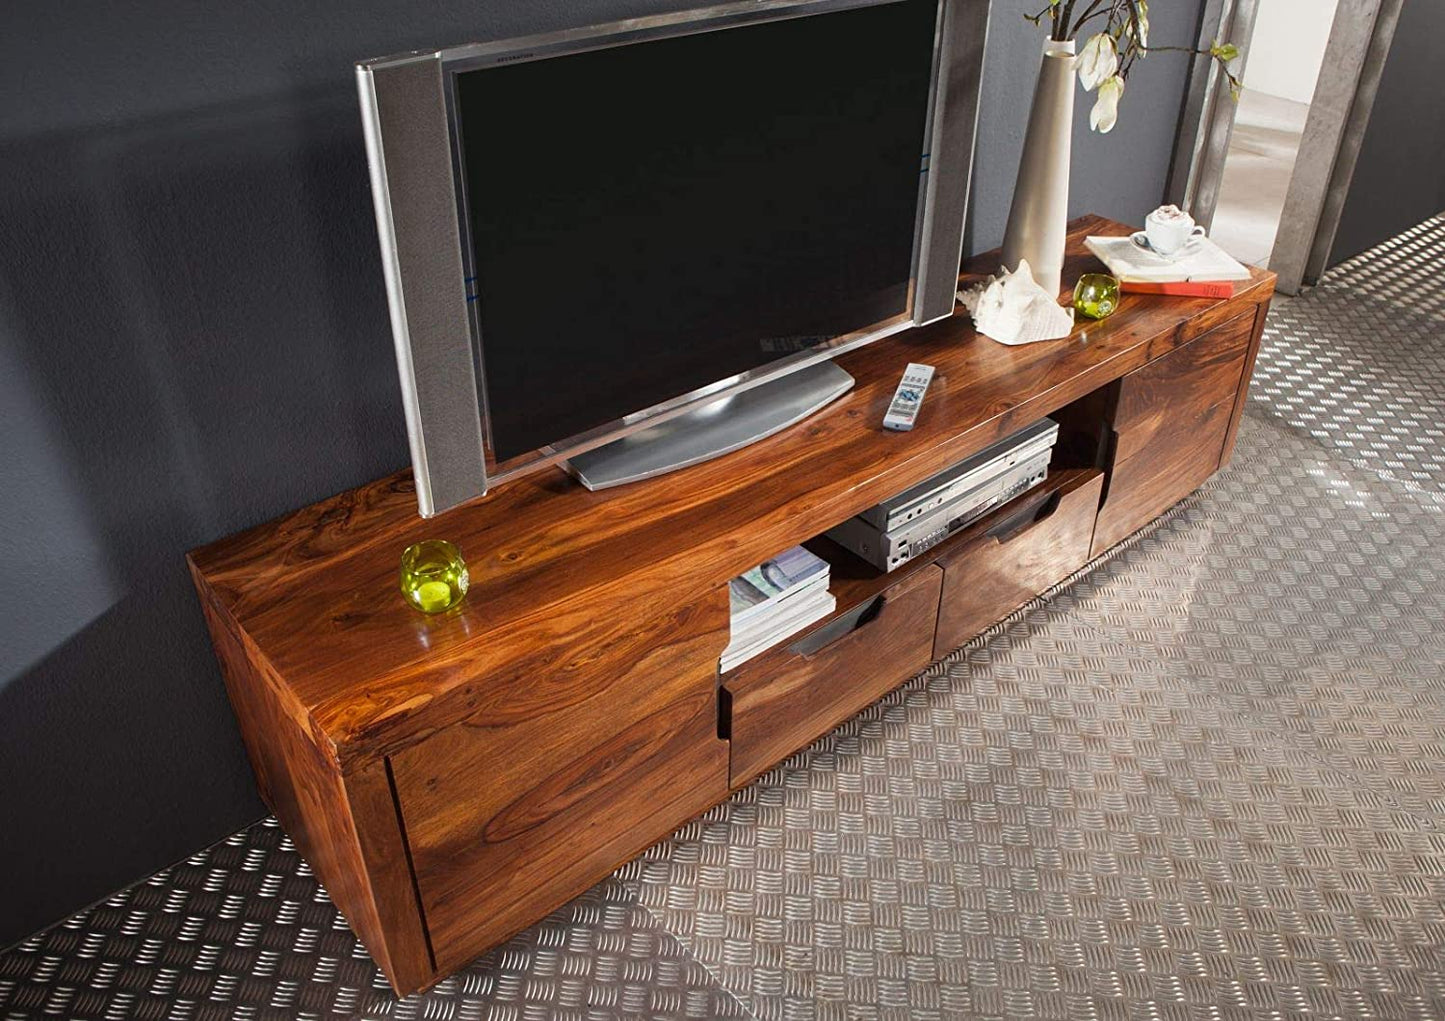 TV unit with two doors and two drawers made of solid sheesham wood